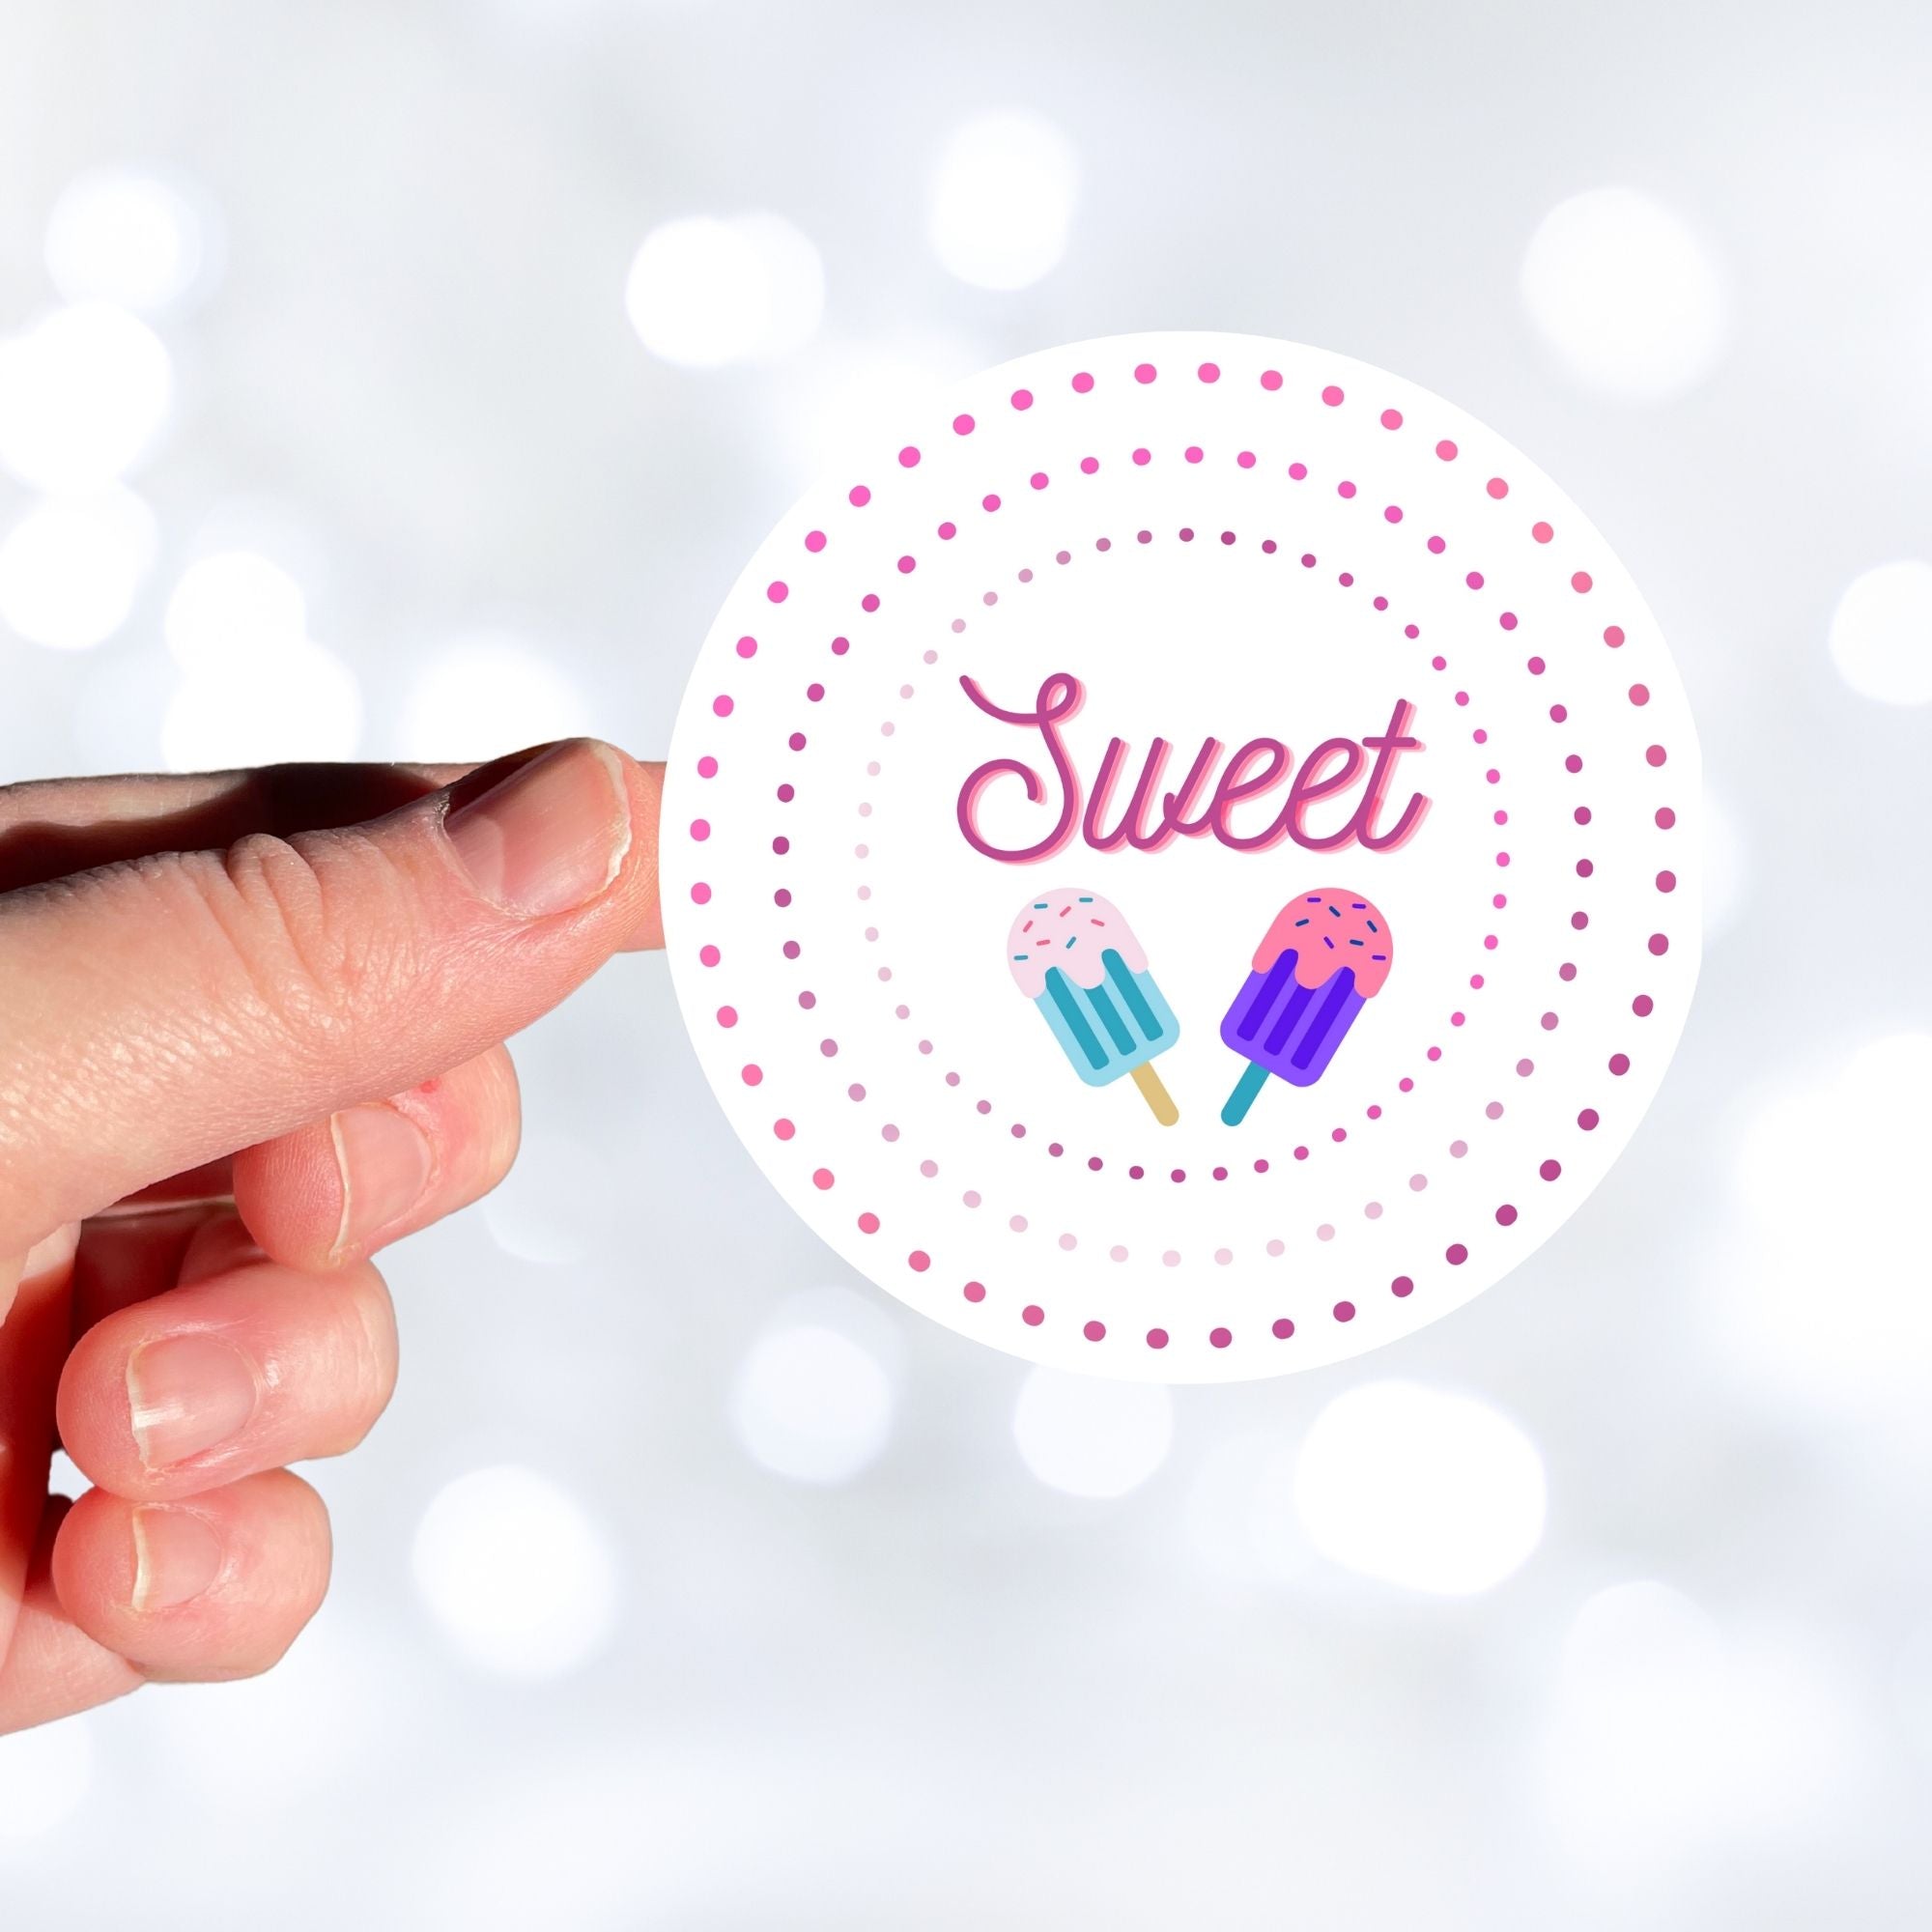 Sweet as Ice Cream! This round individual die-cut sticker has the word Sweet with two ice cream bars in the center surrounded by pink and purple circular dots. This makes a great gift for your sweetie! This image shows a hand holding the Sweet - Ice Cream sticker.